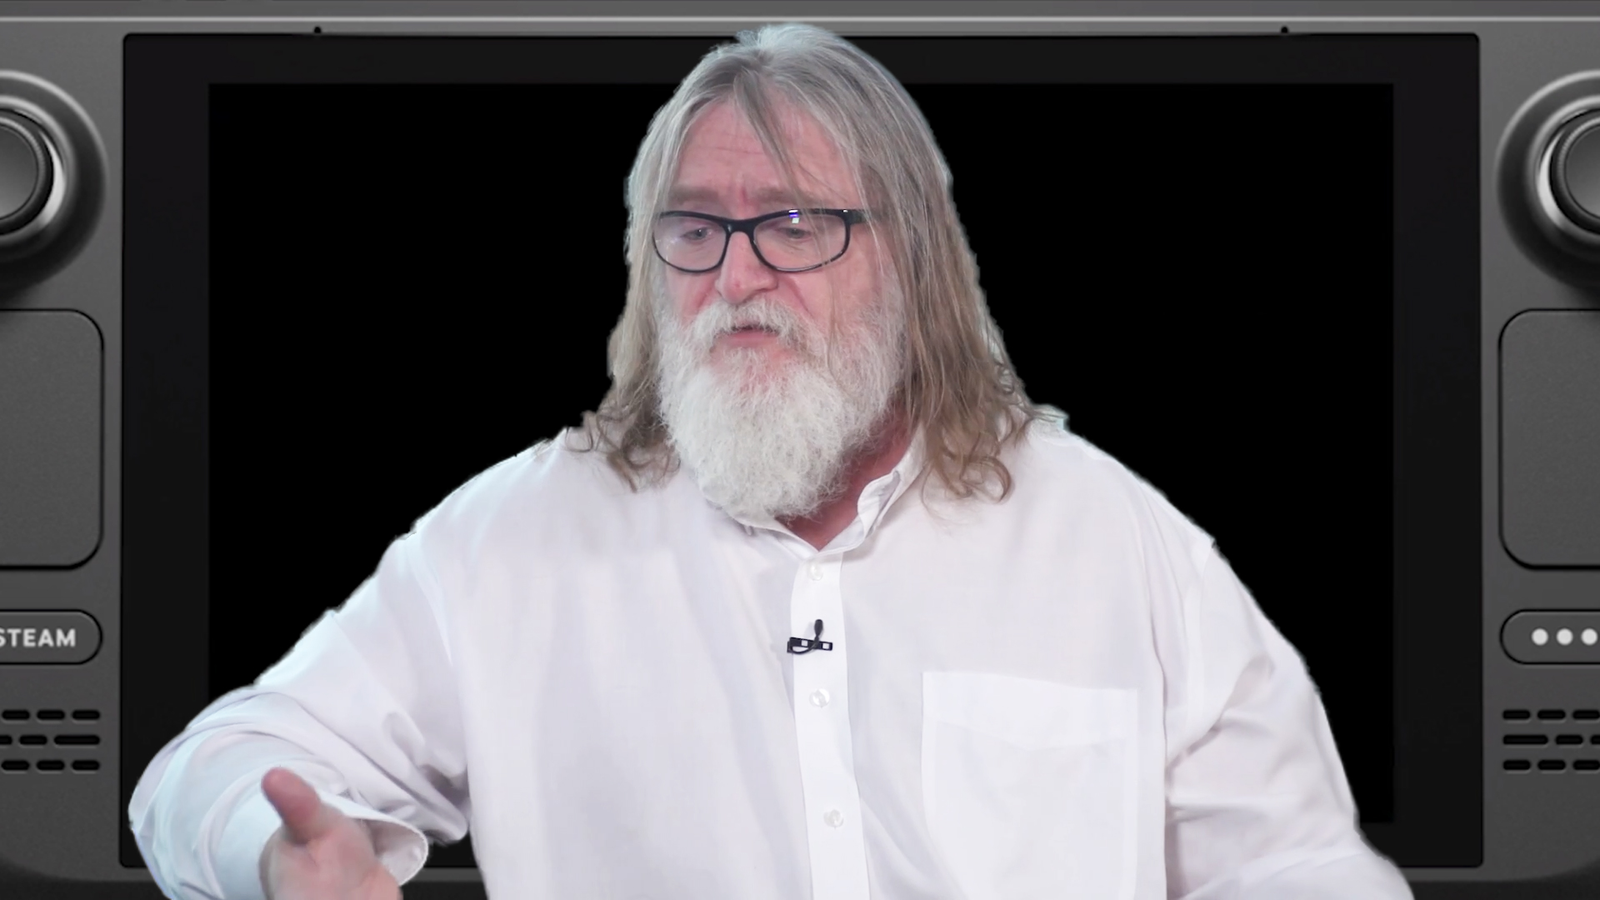 Gabe Newell talks Steam Deck, crypto risks and why the PC industry